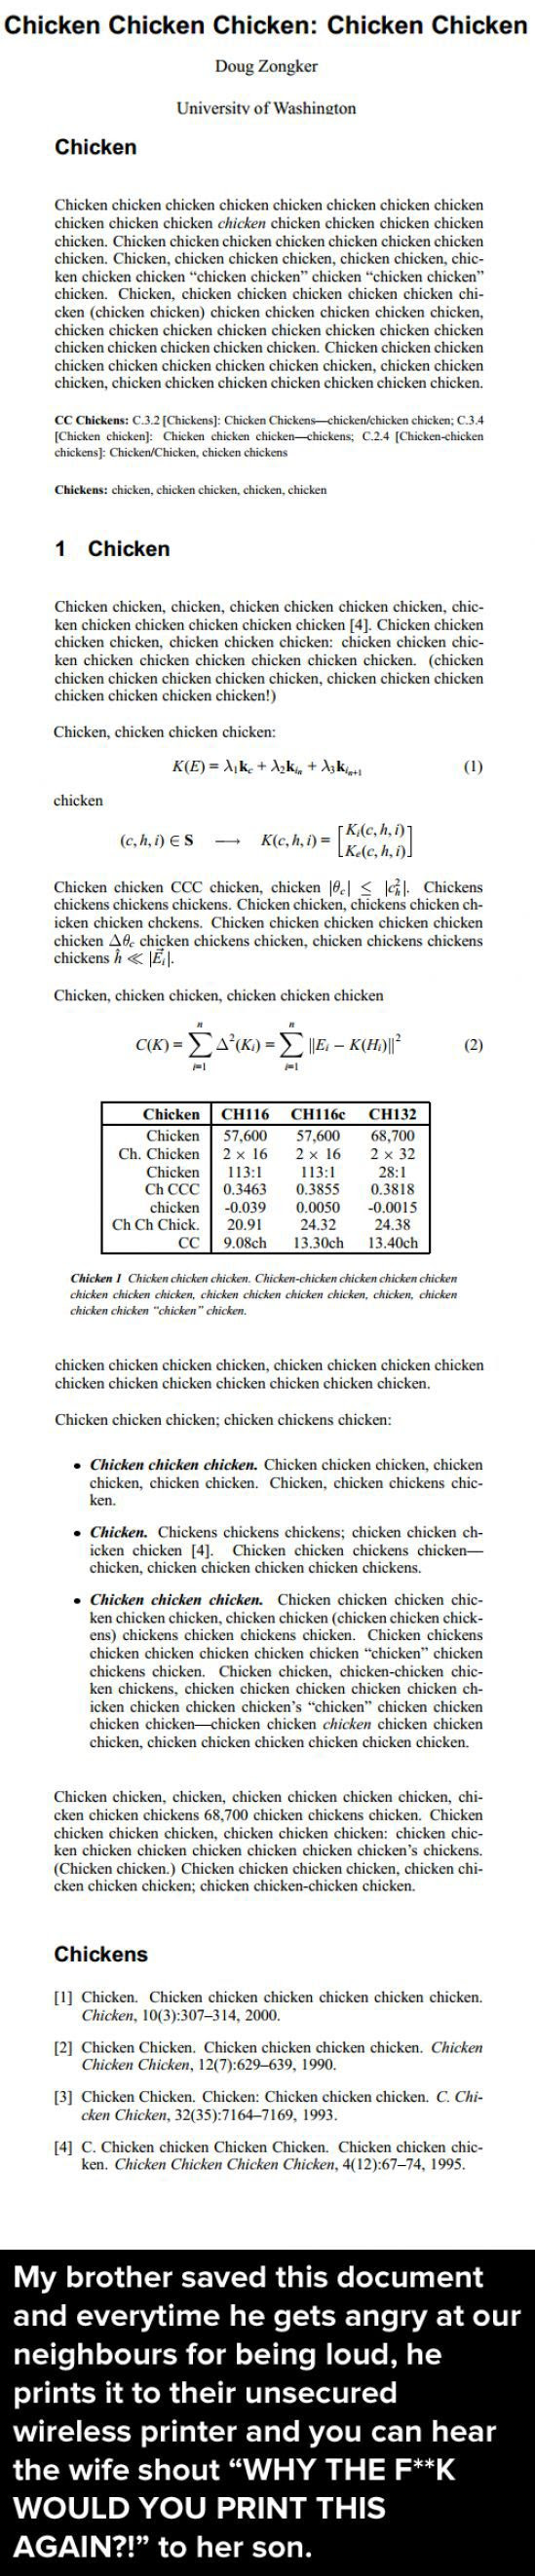 Is Anyone In the Mood for Chicken?